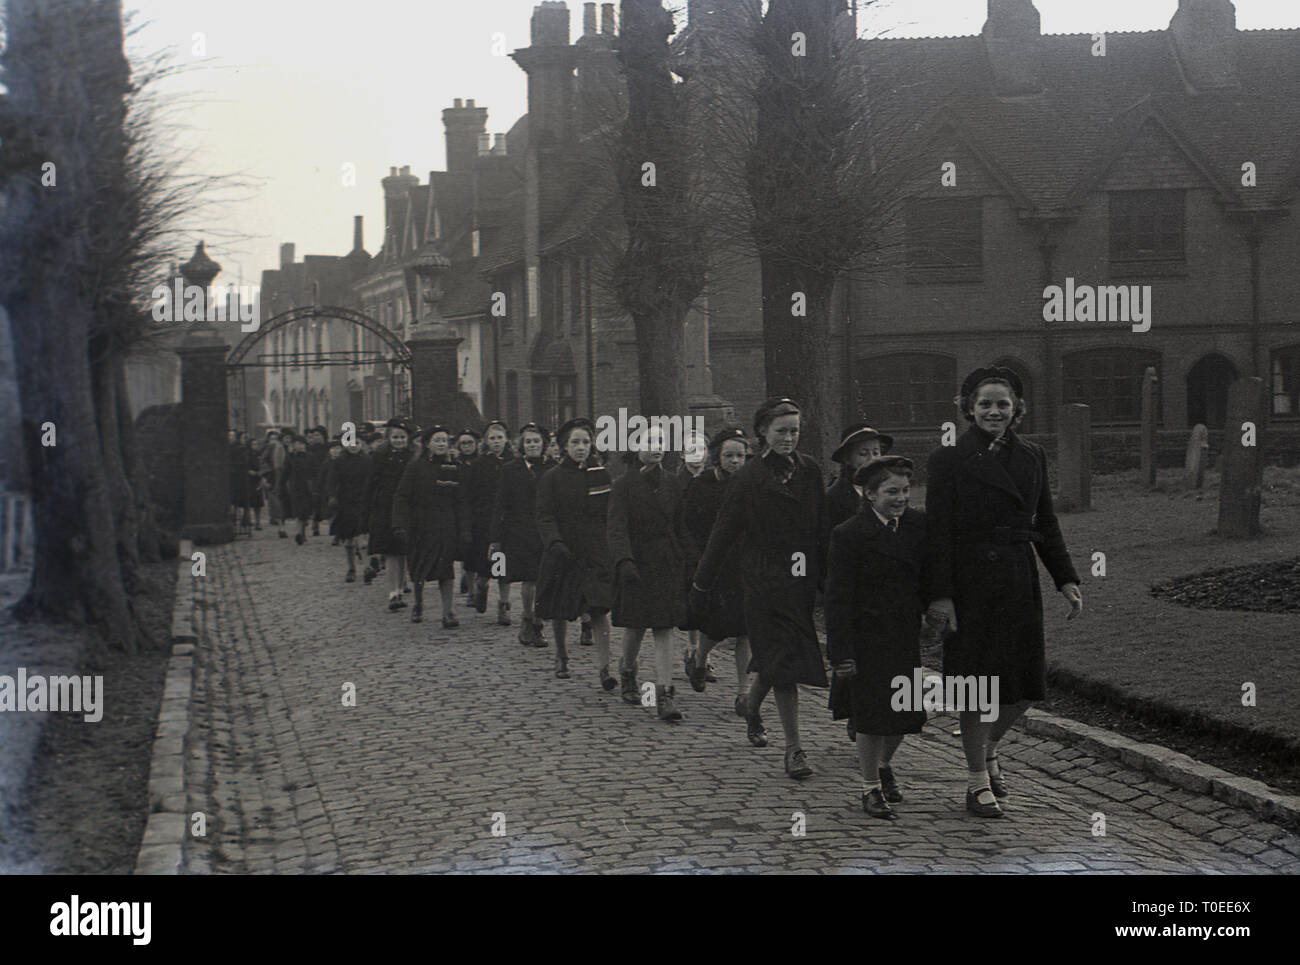 1948, a group of boarding school children walking on a cobbled path inside church grounds on the way to a Sunday service, England, UK. Stock Photo